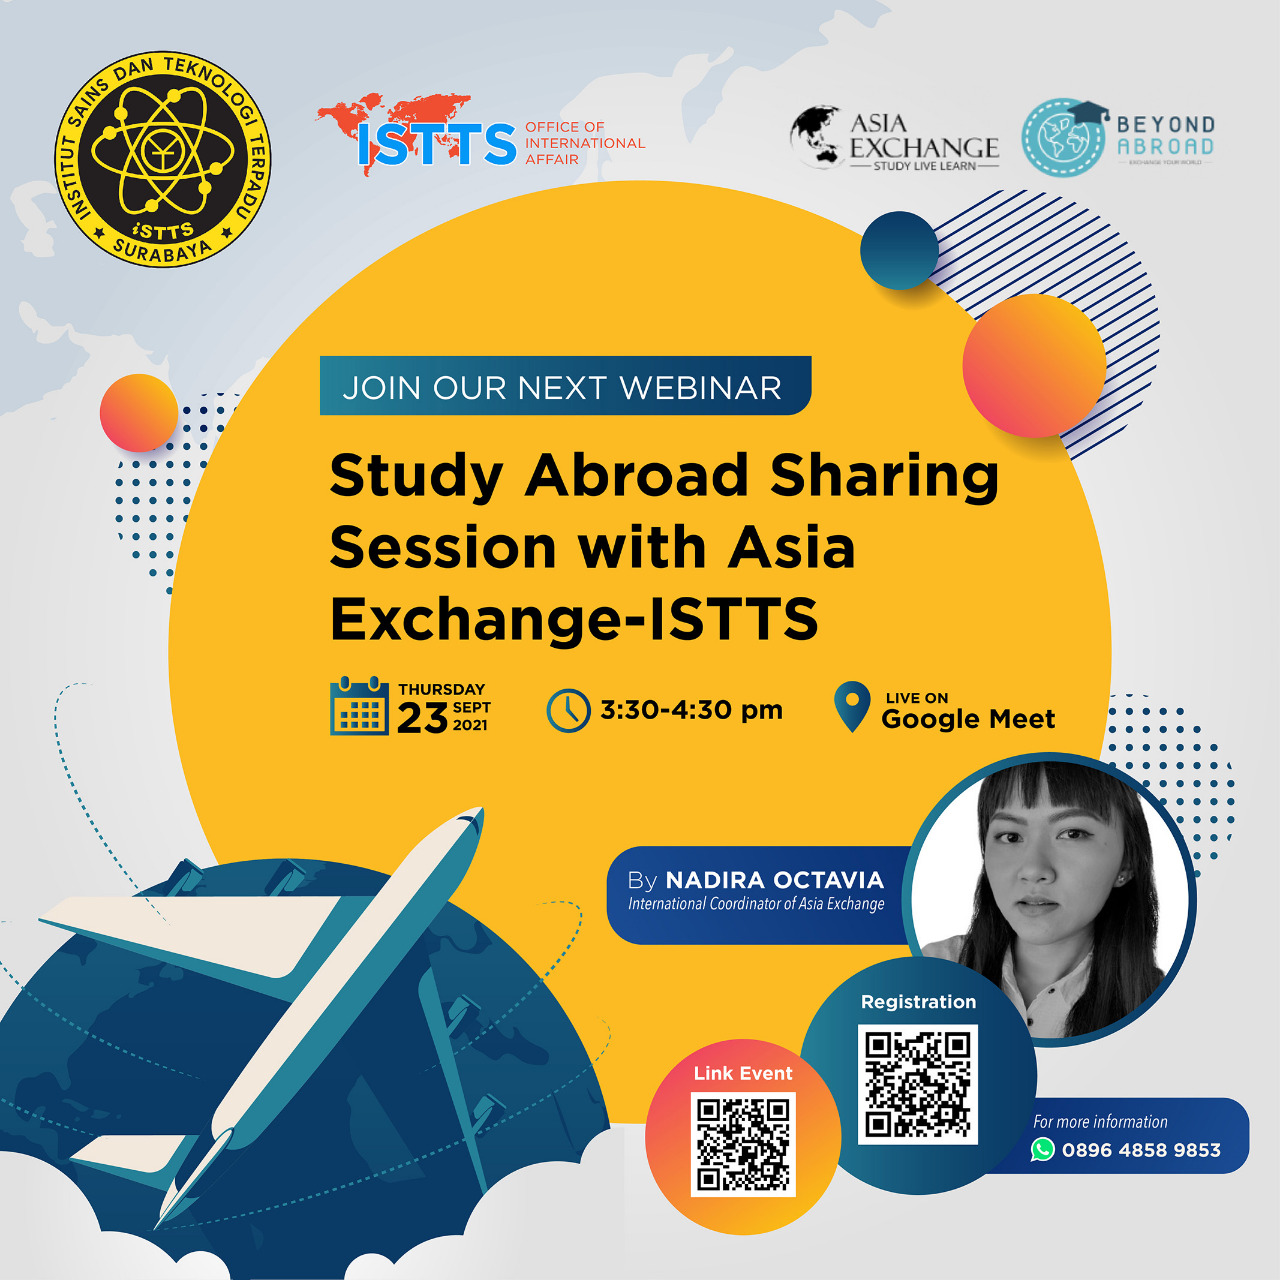 Webinar "Study Abroad Sharing Session with Asia Exchange-ISTTS"